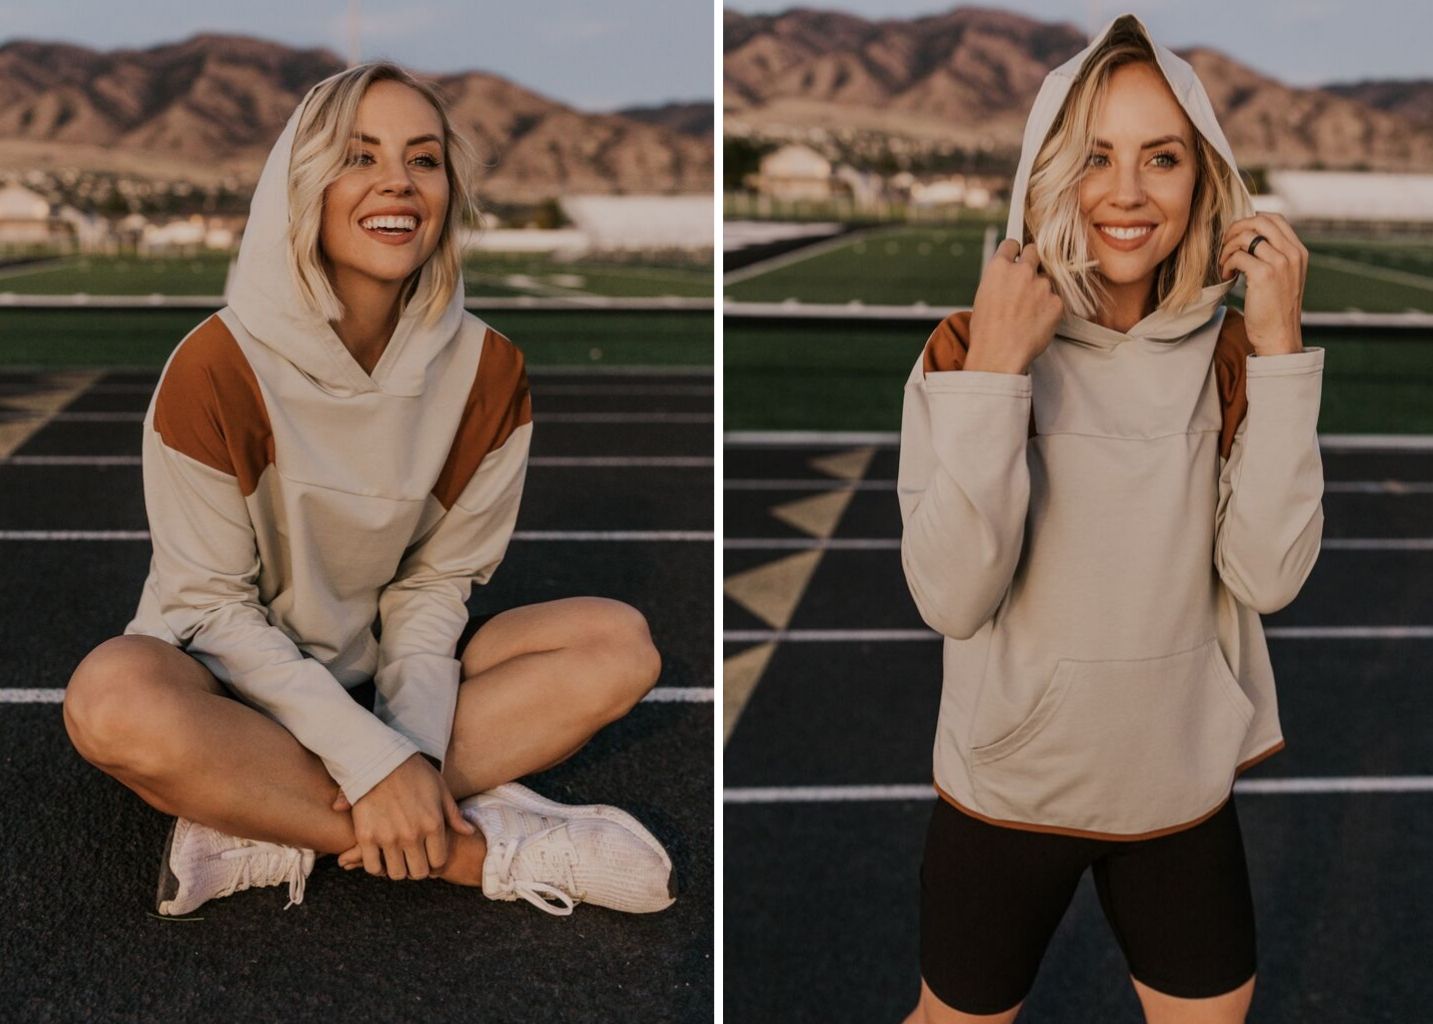 Athleisure Outfit Ideas